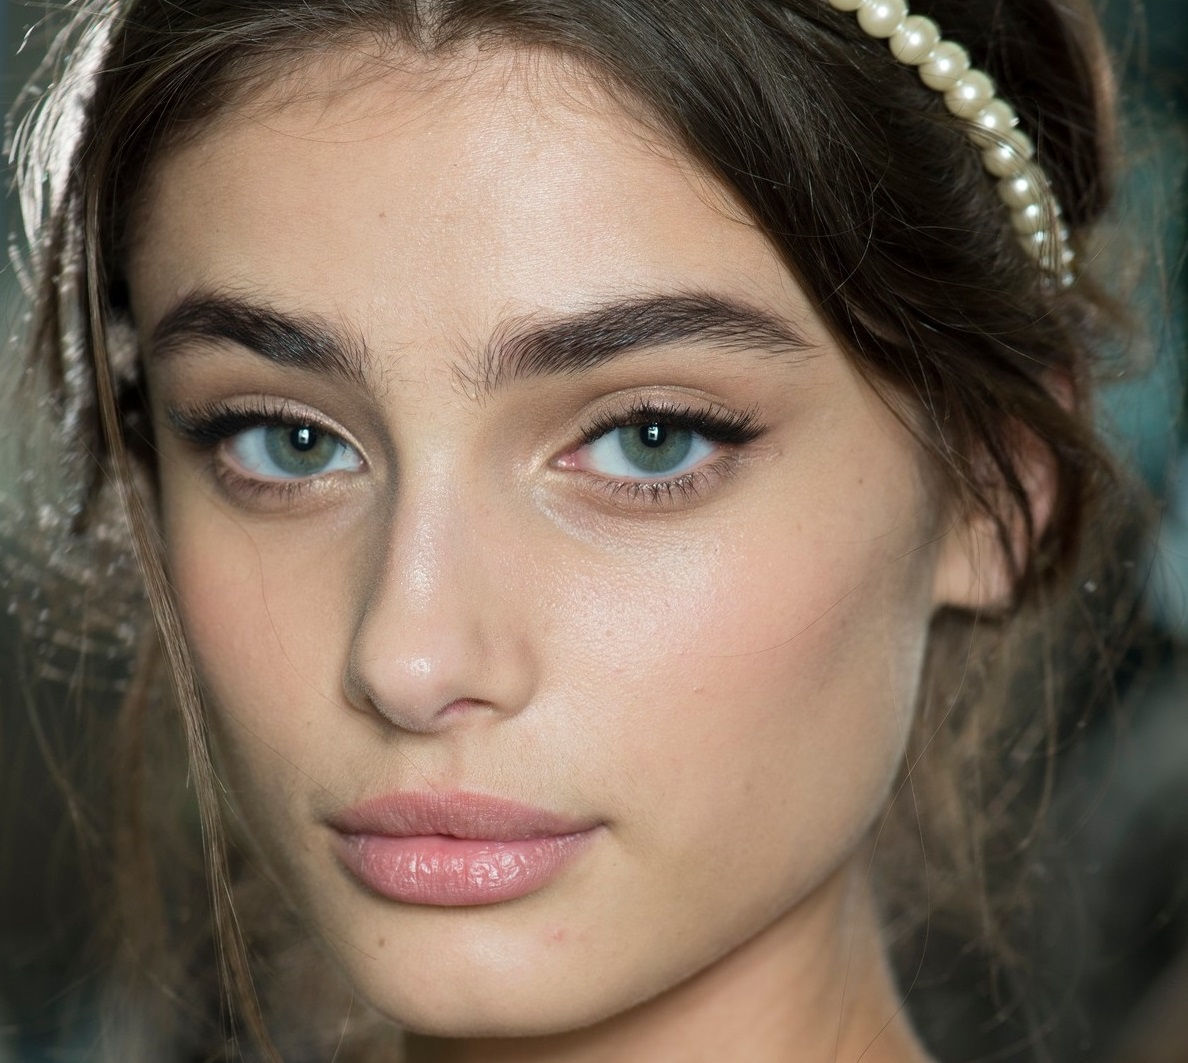 FOR EDITORIAL USE ONLY. Dolce and Gabbana Backstage Milan Ready to Wear. Autumn/Winter 2015. American model Taylor Hill. ADDITIONAL IMAGES AVAILABLE ON REQUEST., Image: 235100249, License: Rights-managed, Restrictions: , Model Release: no, Credit line: Anthea Simms / Camerapress / Profimedia